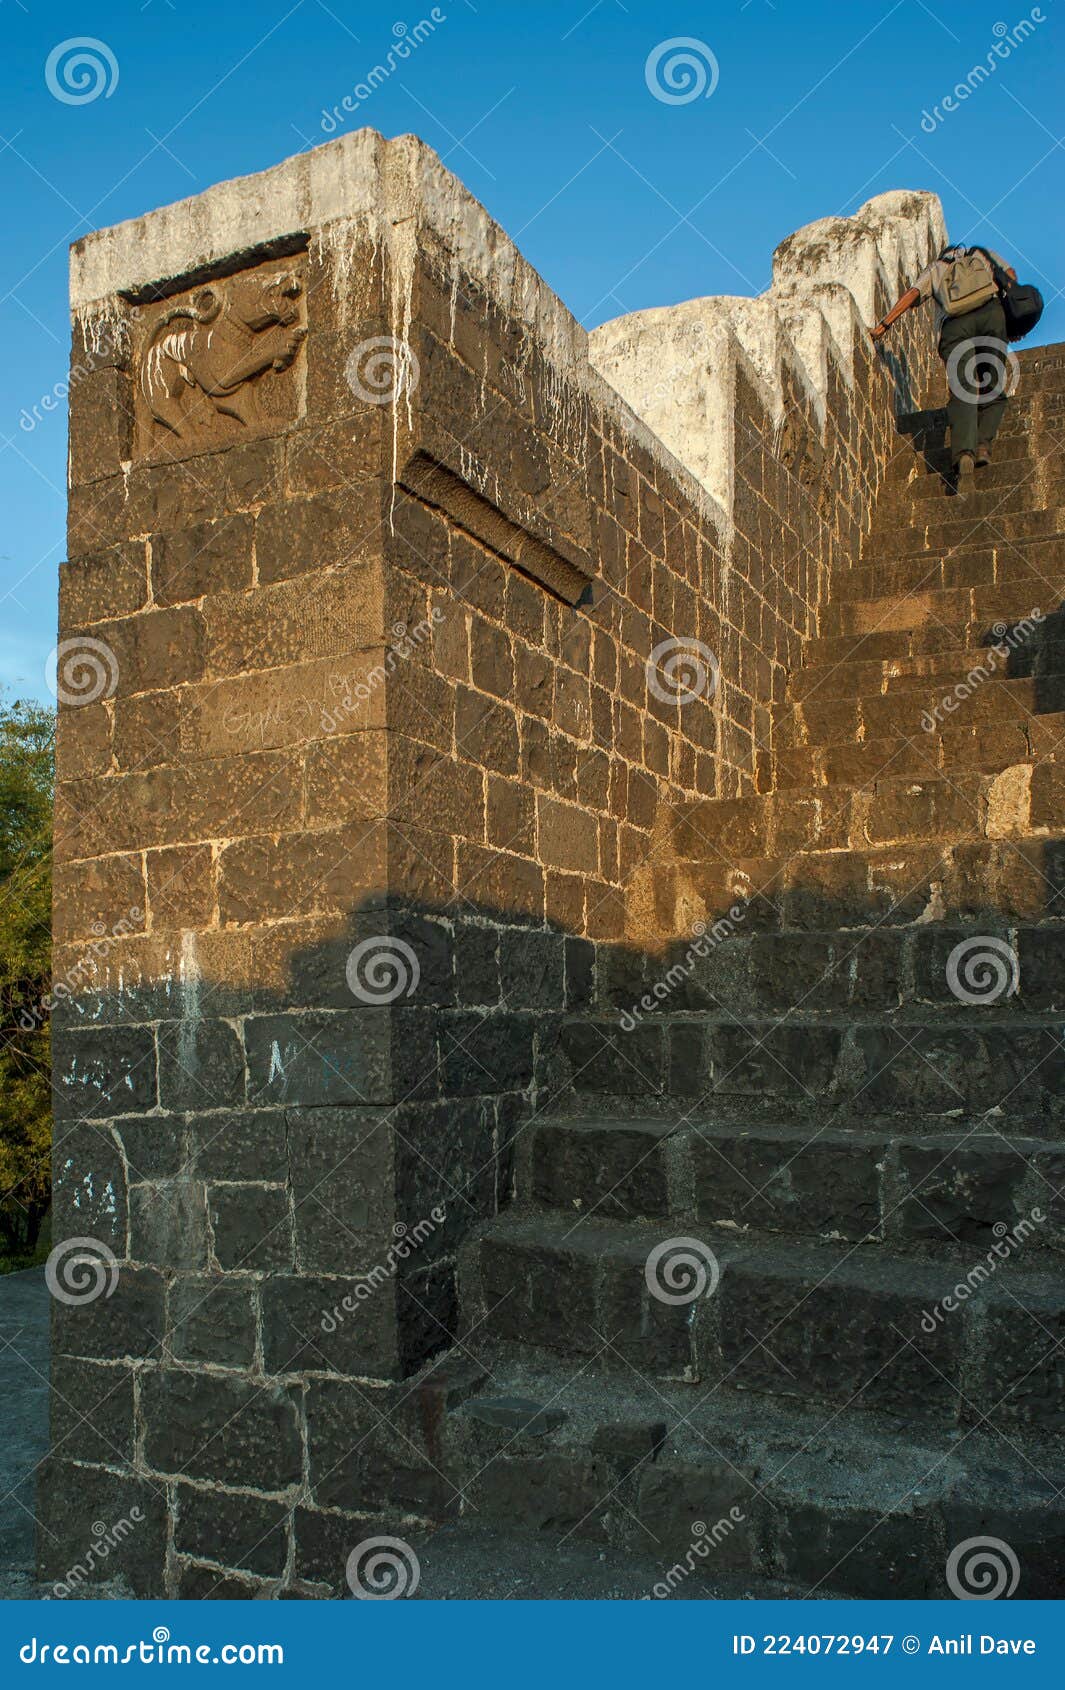 stone stapes on solapur forts wall and staircase